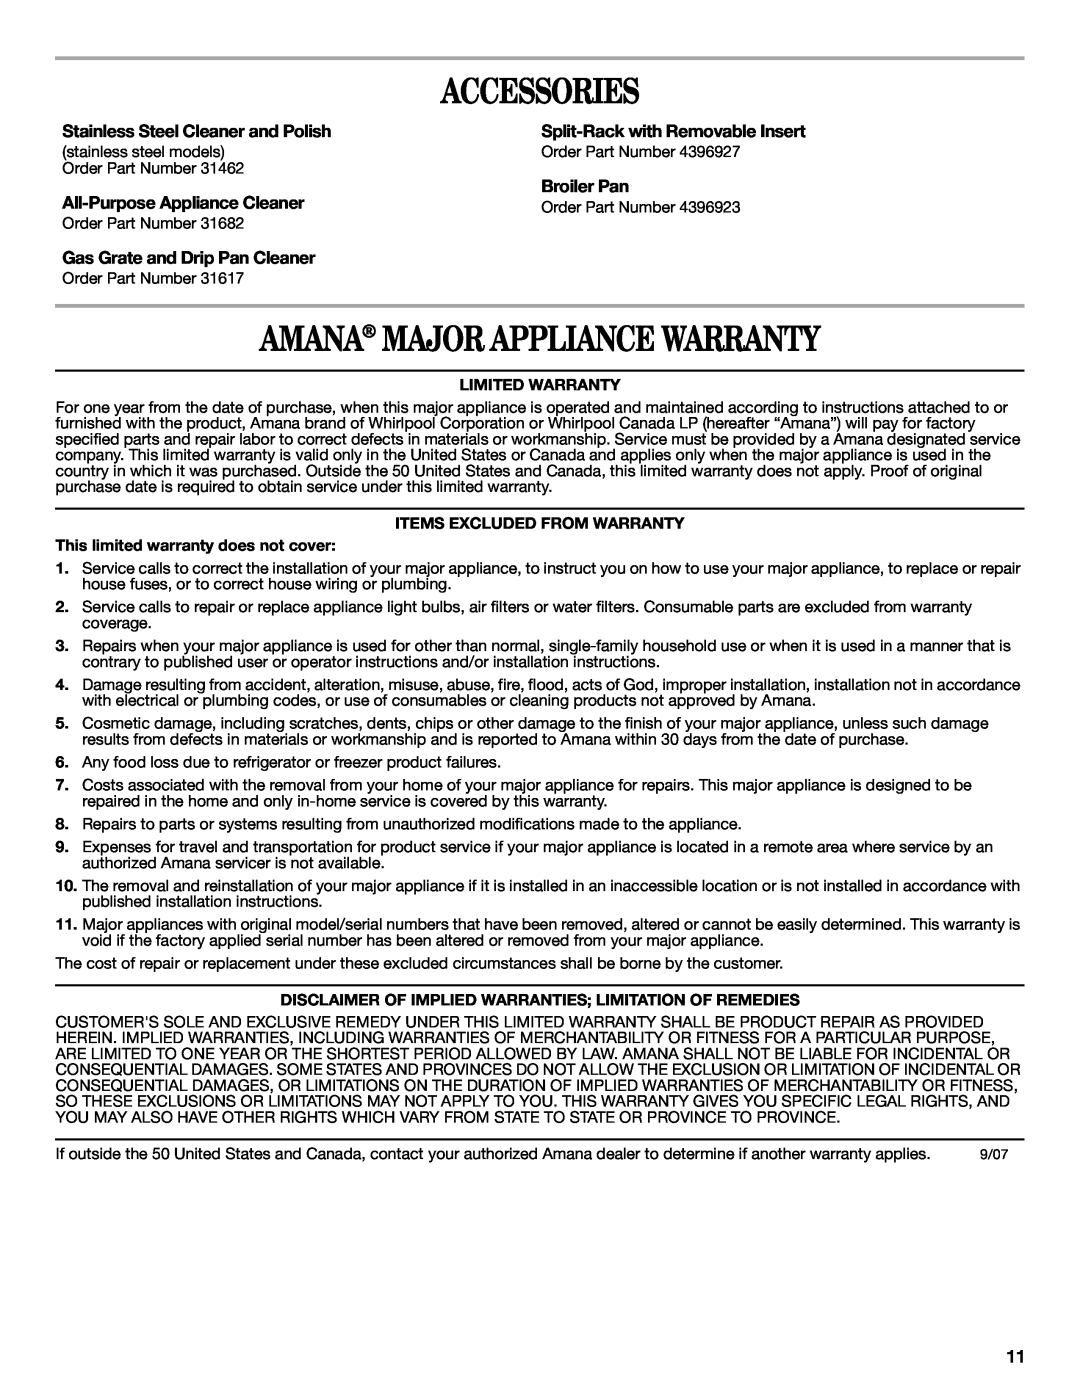 Amana W10196156B warranty Accessories, Amana Major Appliance Warranty, Stainless Steel Cleaner and Polish, Broiler Pan 